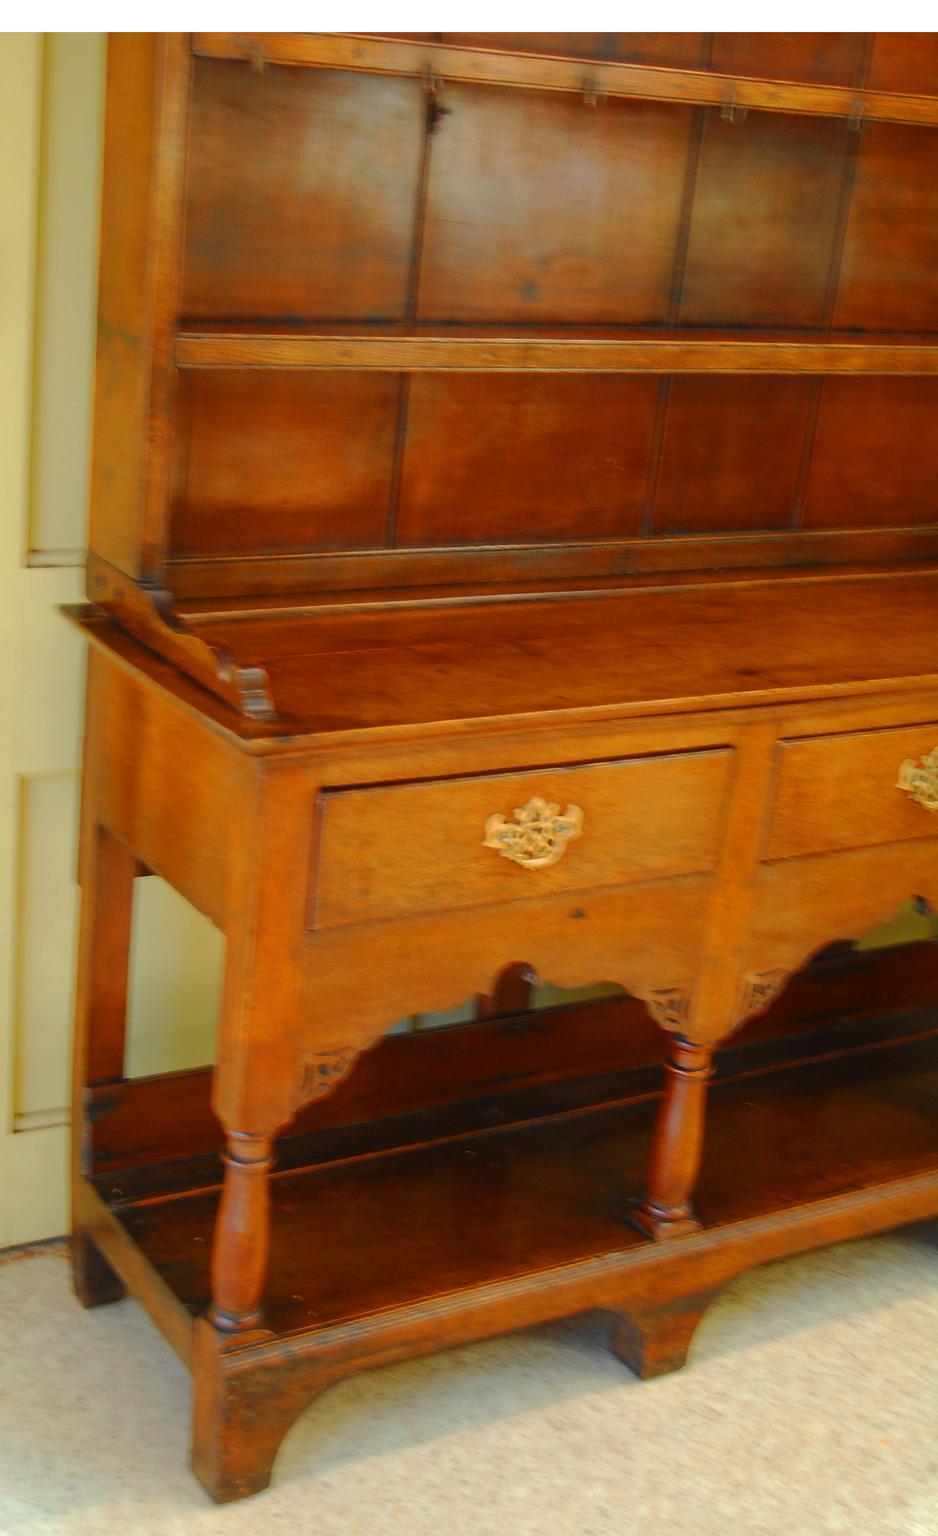 18th Century Welsh Georgian Oak Potboard Dresser with Full Rack, Drawers and Lower Shelf For Sale